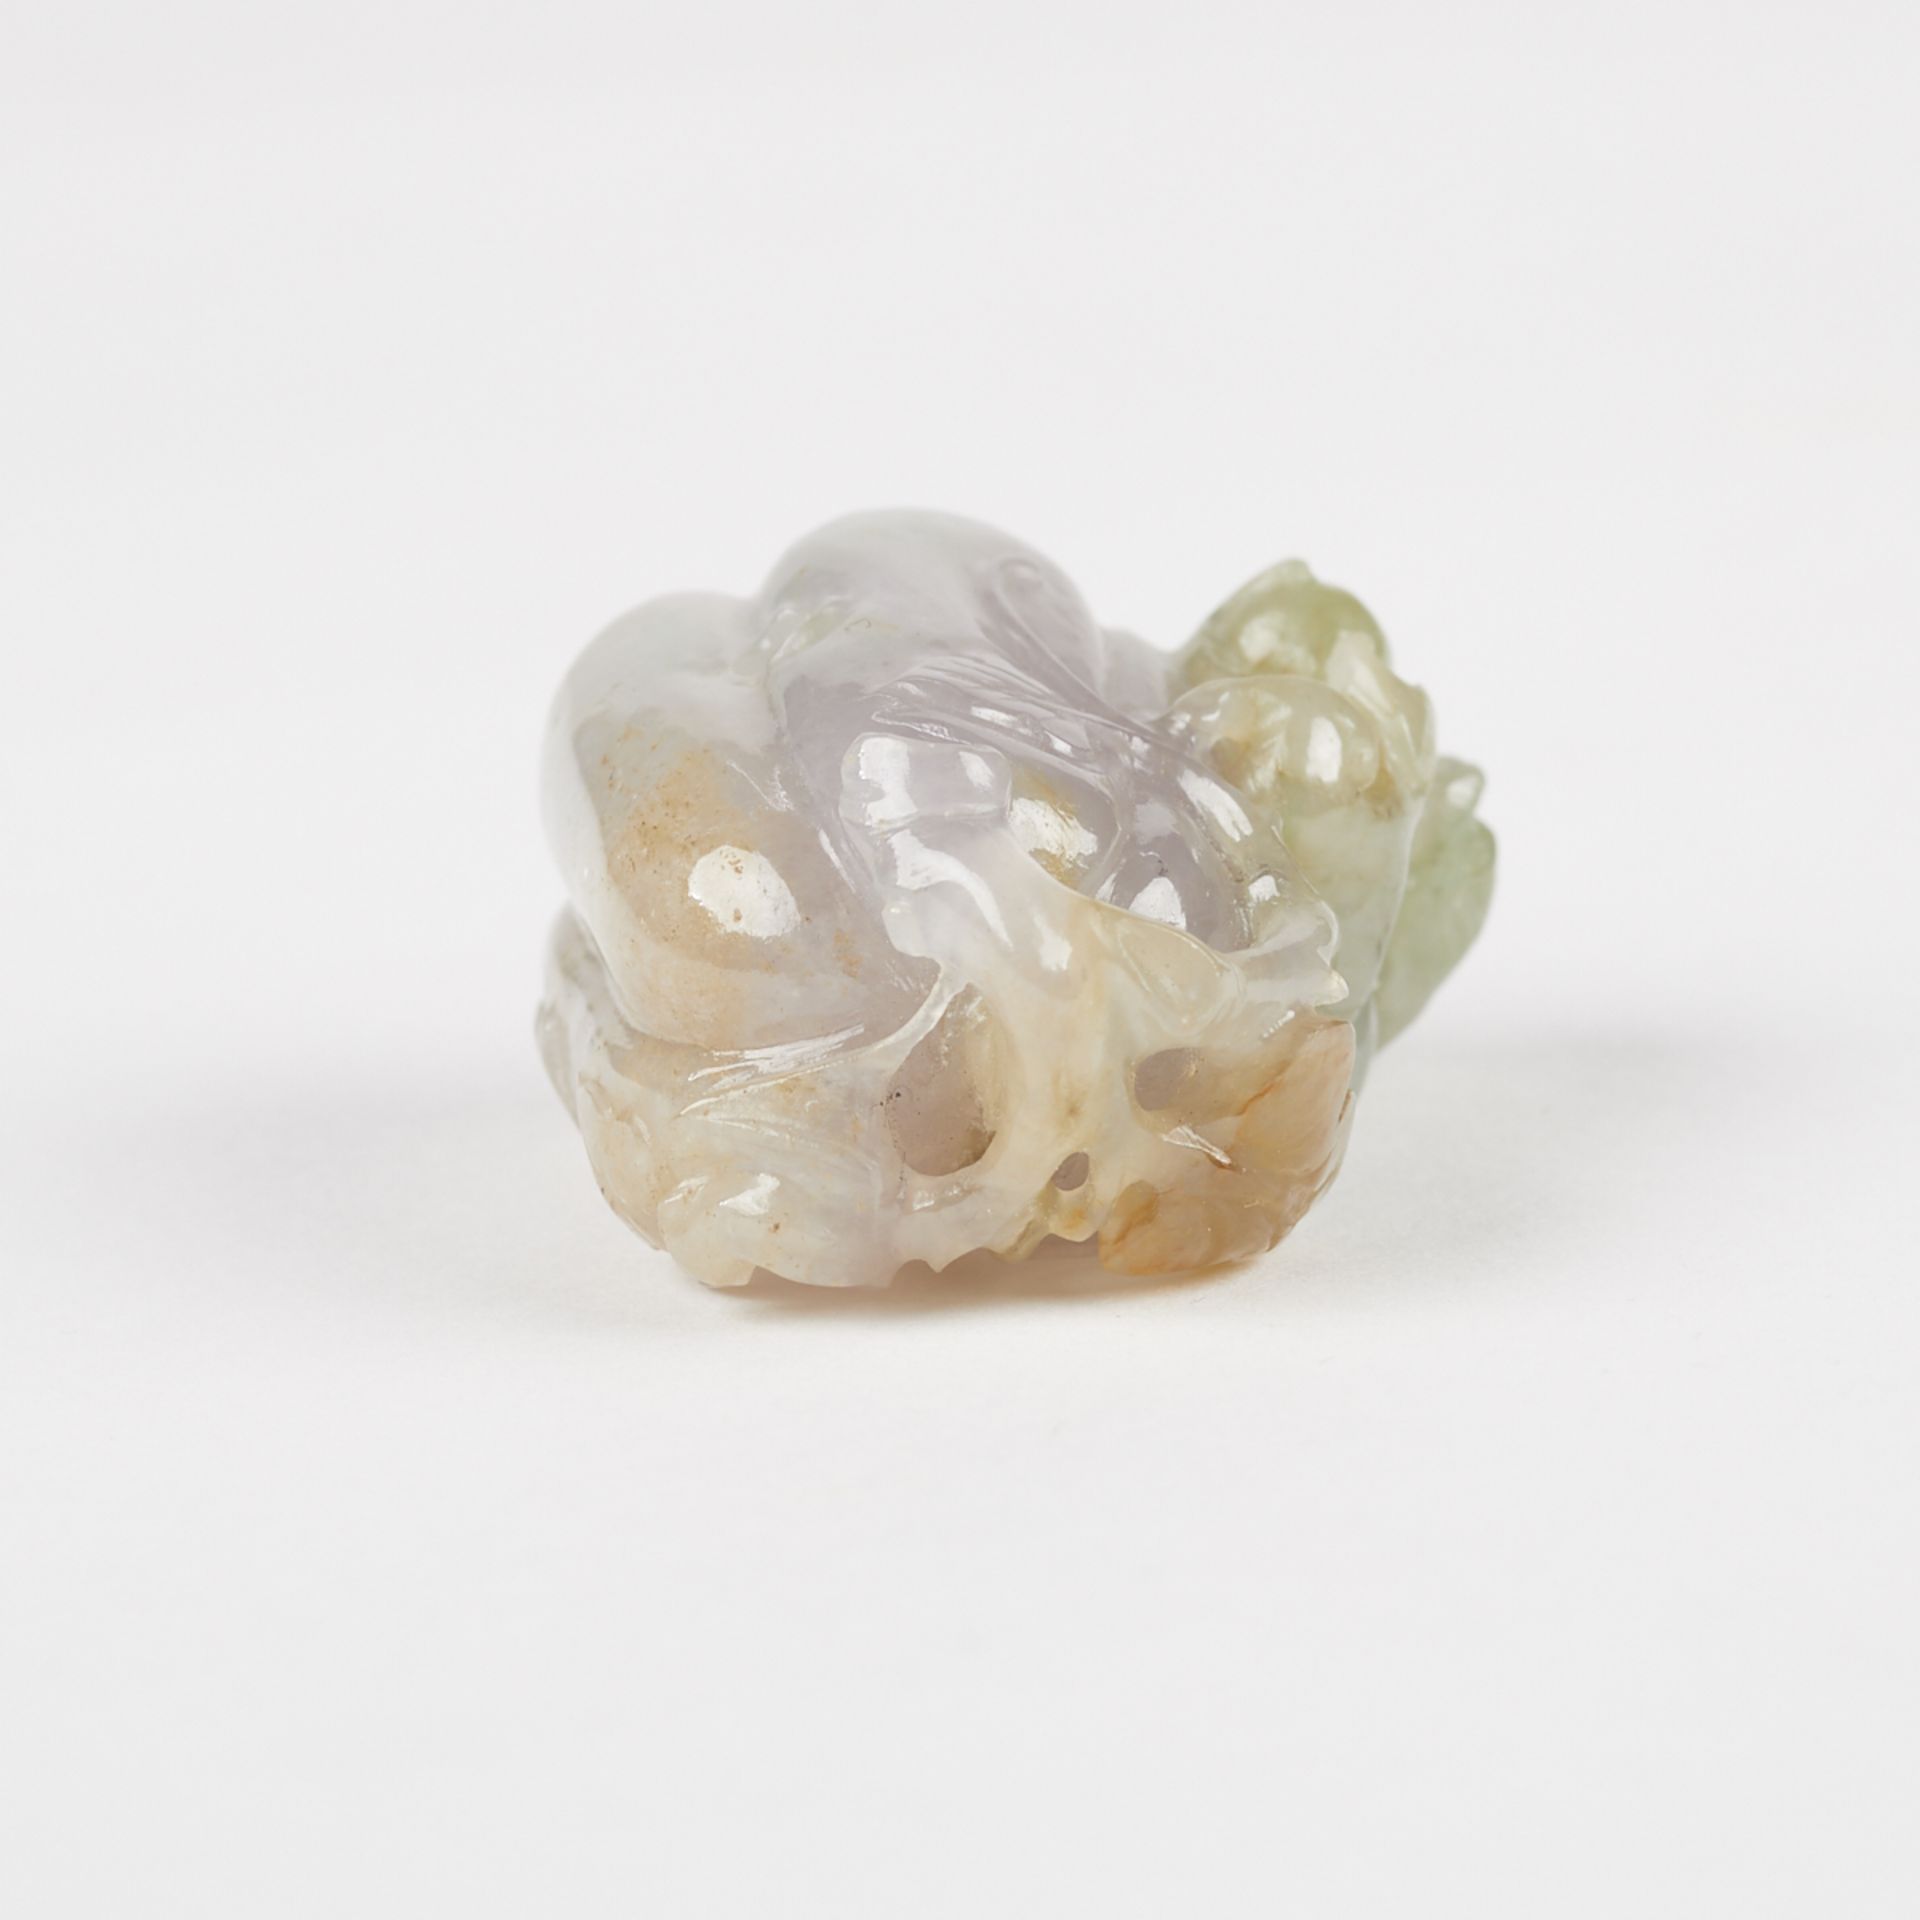 Chinese Lavender Celadon Jade Melon Carving - Image 7 of 7